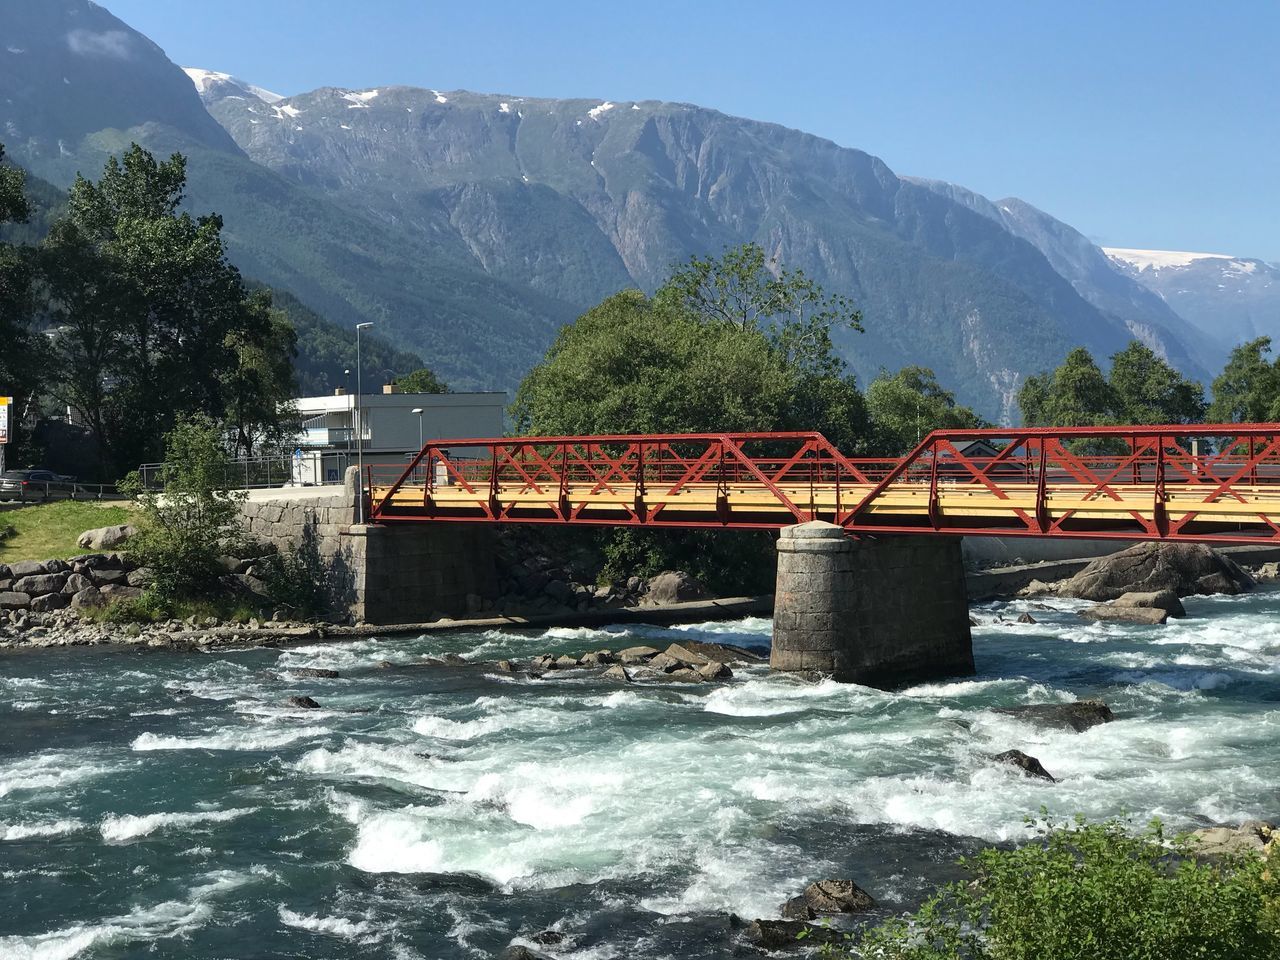 mountain, water, mountain range, nature, beauty in nature, built structure, architecture, bridge, day, bridge - man made structure, river, sky, plant, scenics - nature, connection, flowing water, no people, tree, motion, outdoors, flowing